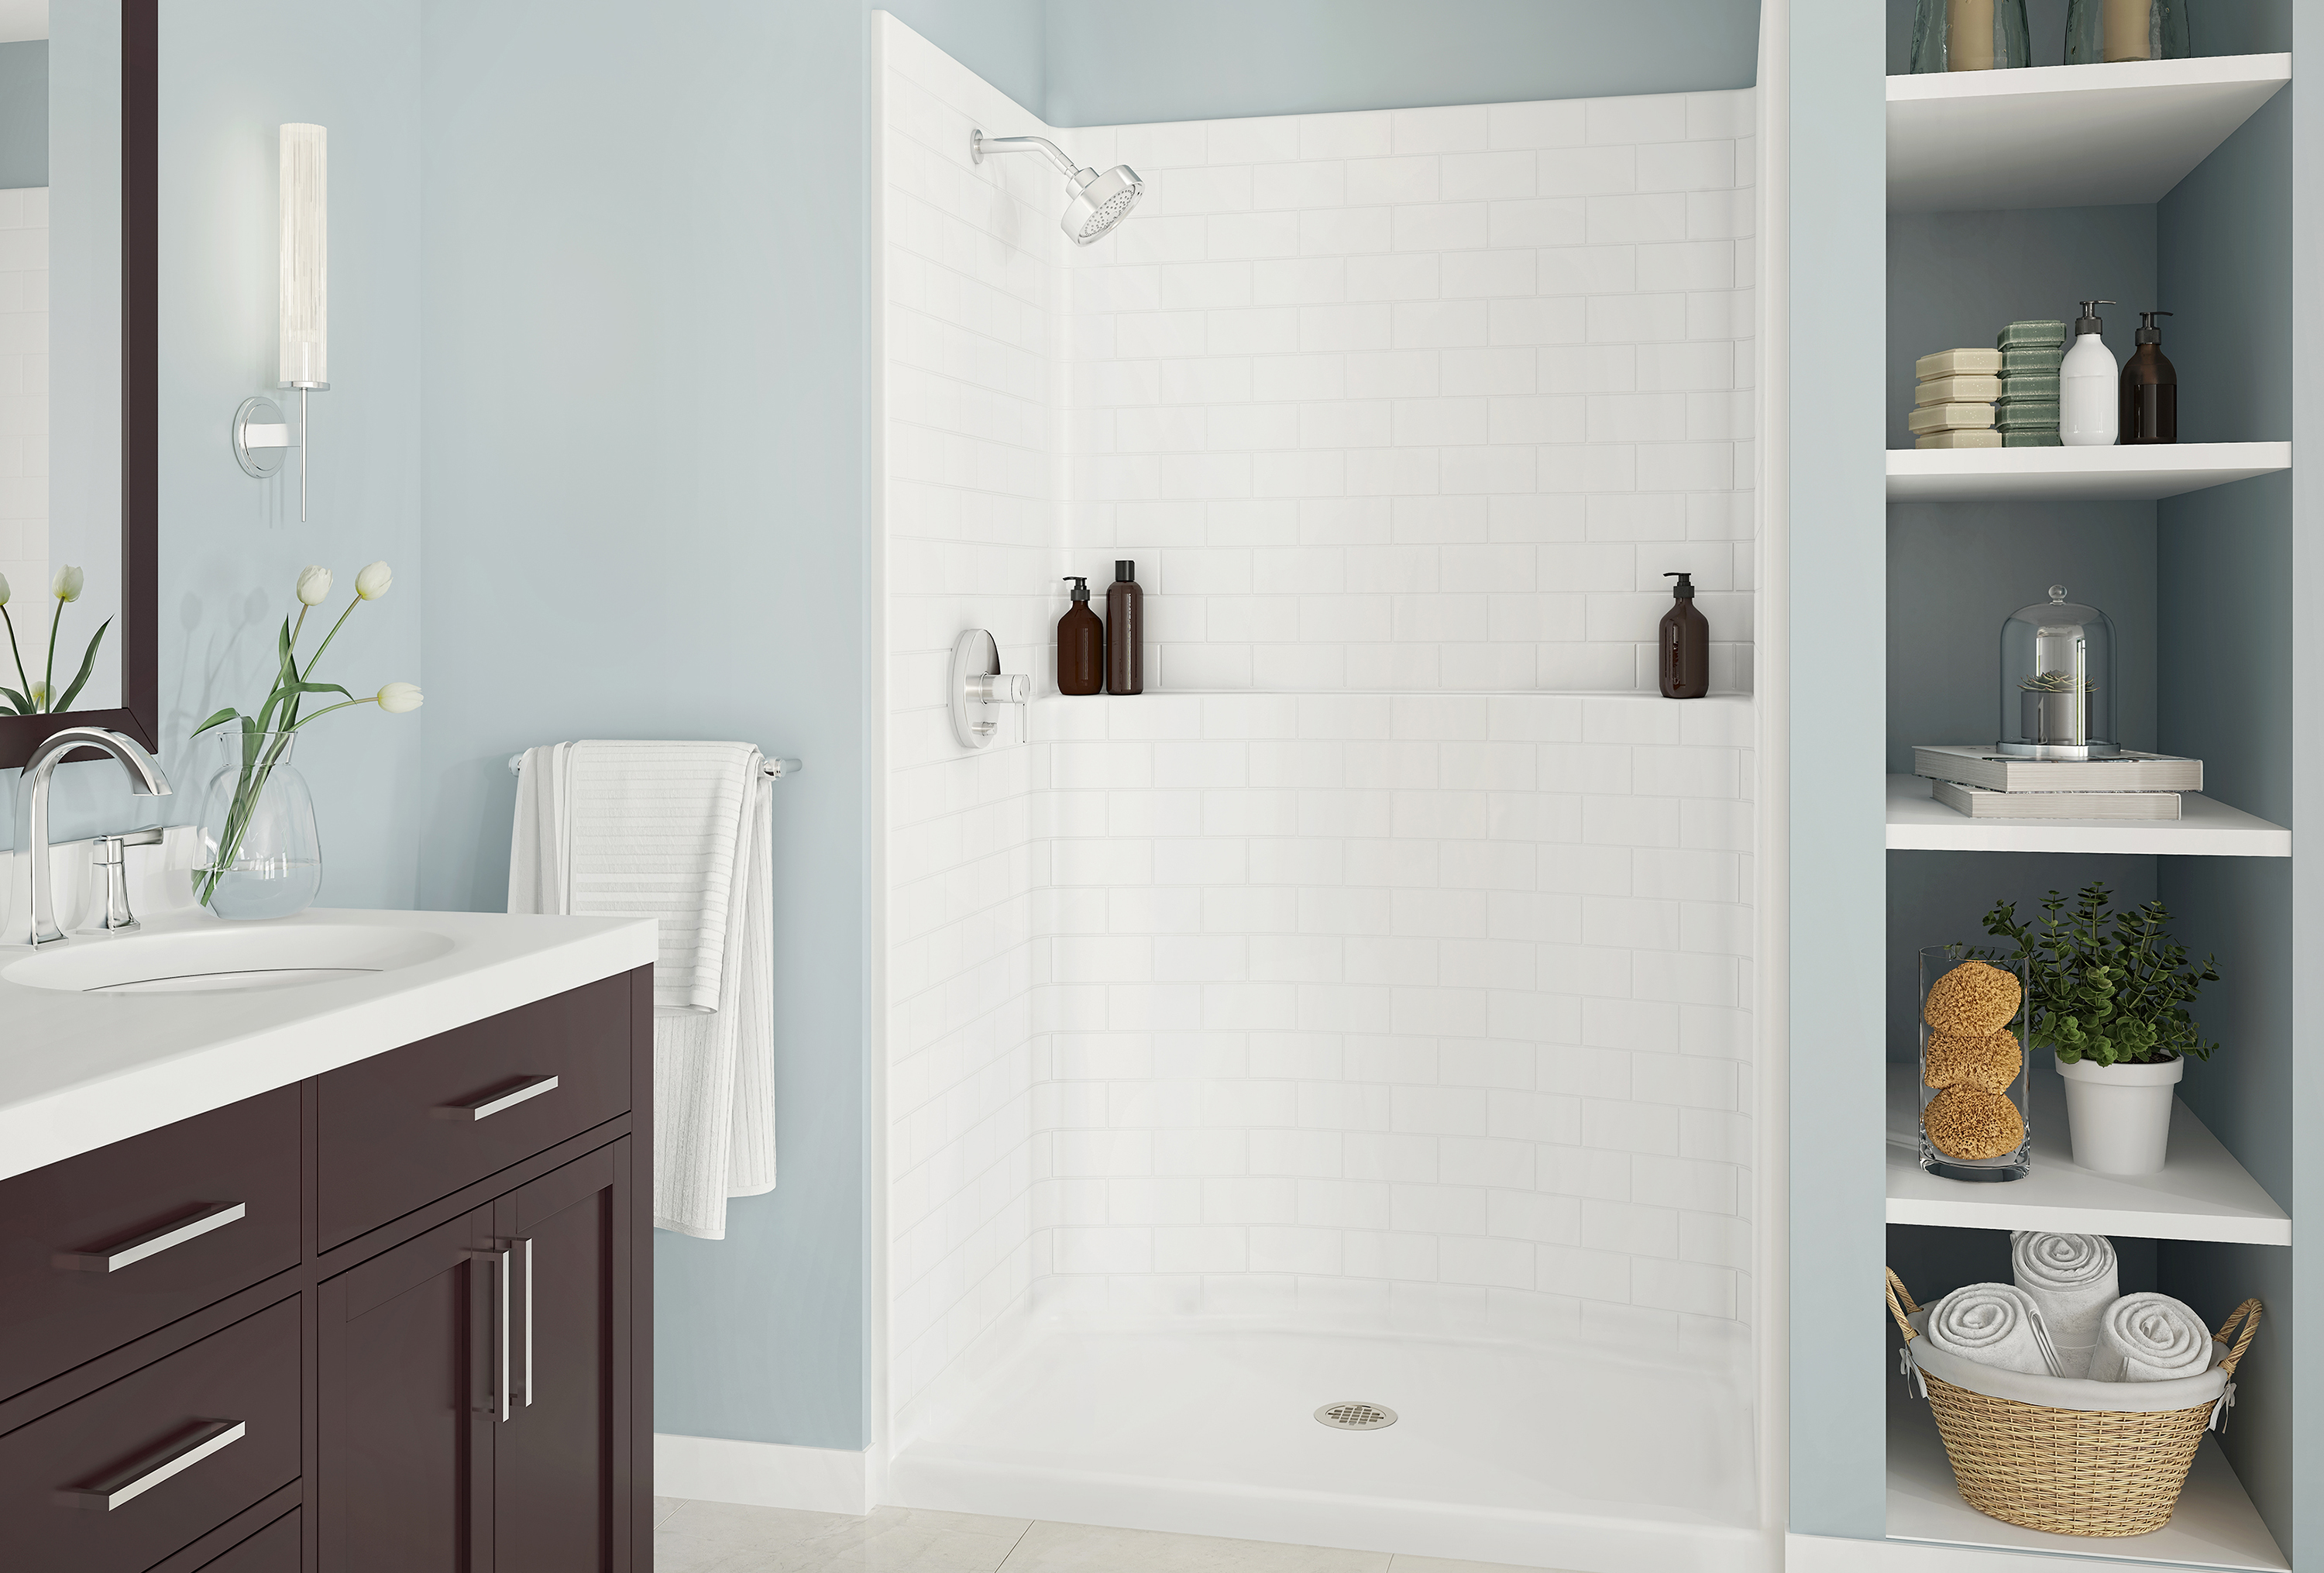 http://res.cloudinary.com/american-bath-group/image/upload/v1649871642/websites-product-info-and-content/clarion/content/products/residential/showers/Clarion-showers-featureimage.jpg